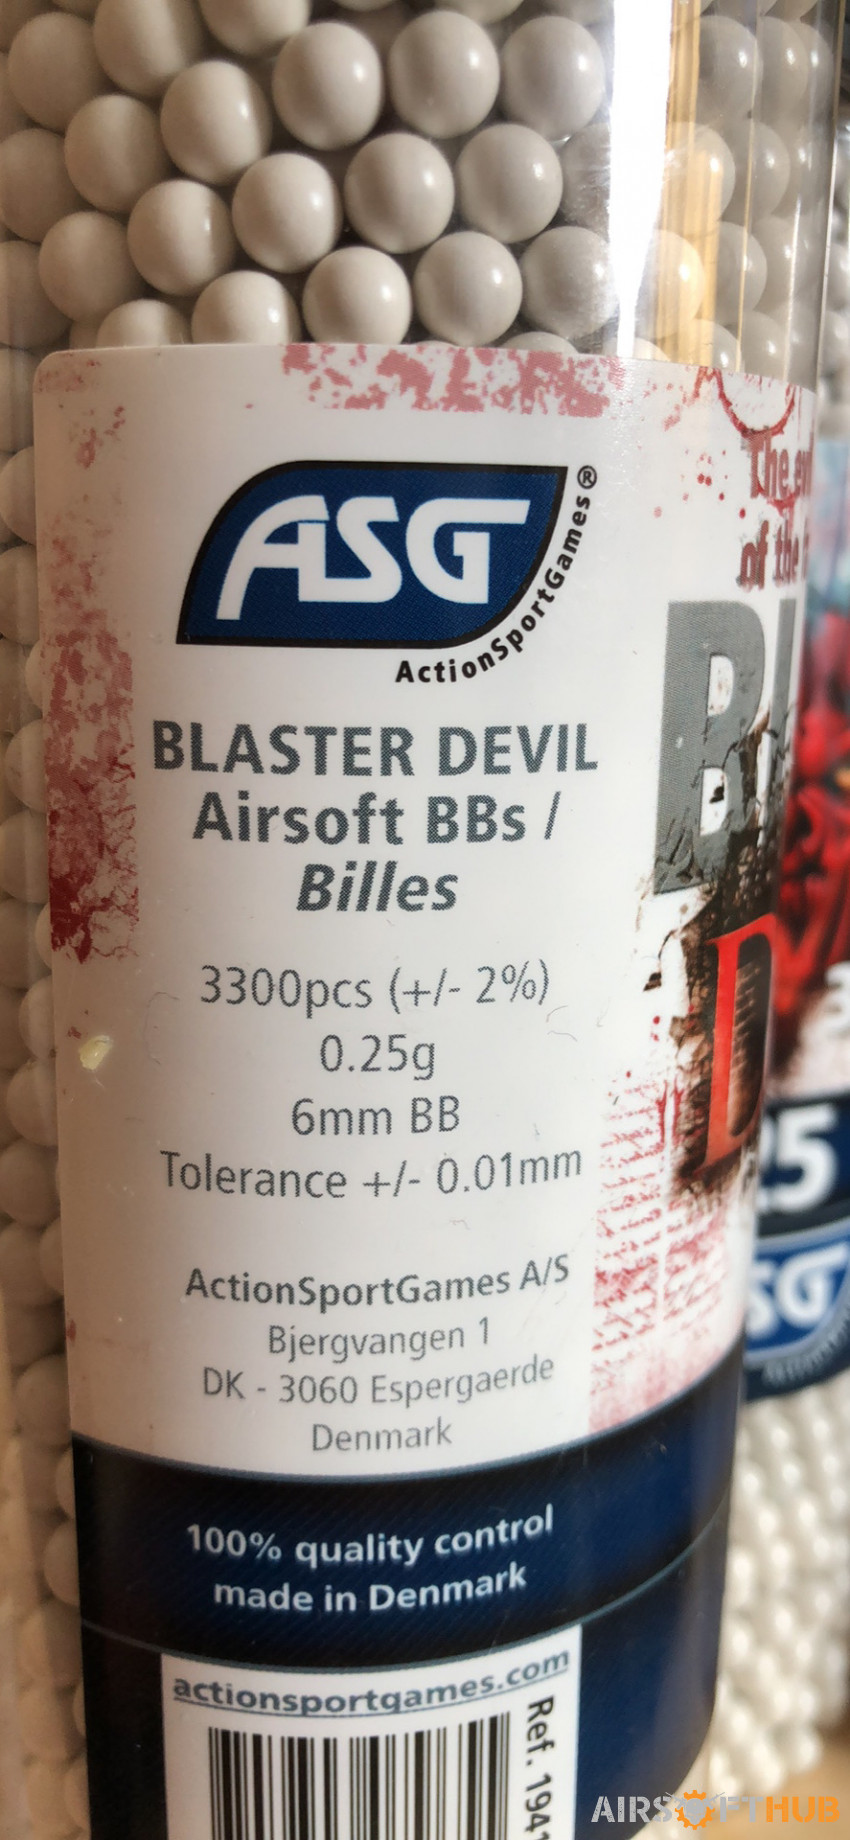 Airsoft BBs - Used airsoft equipment